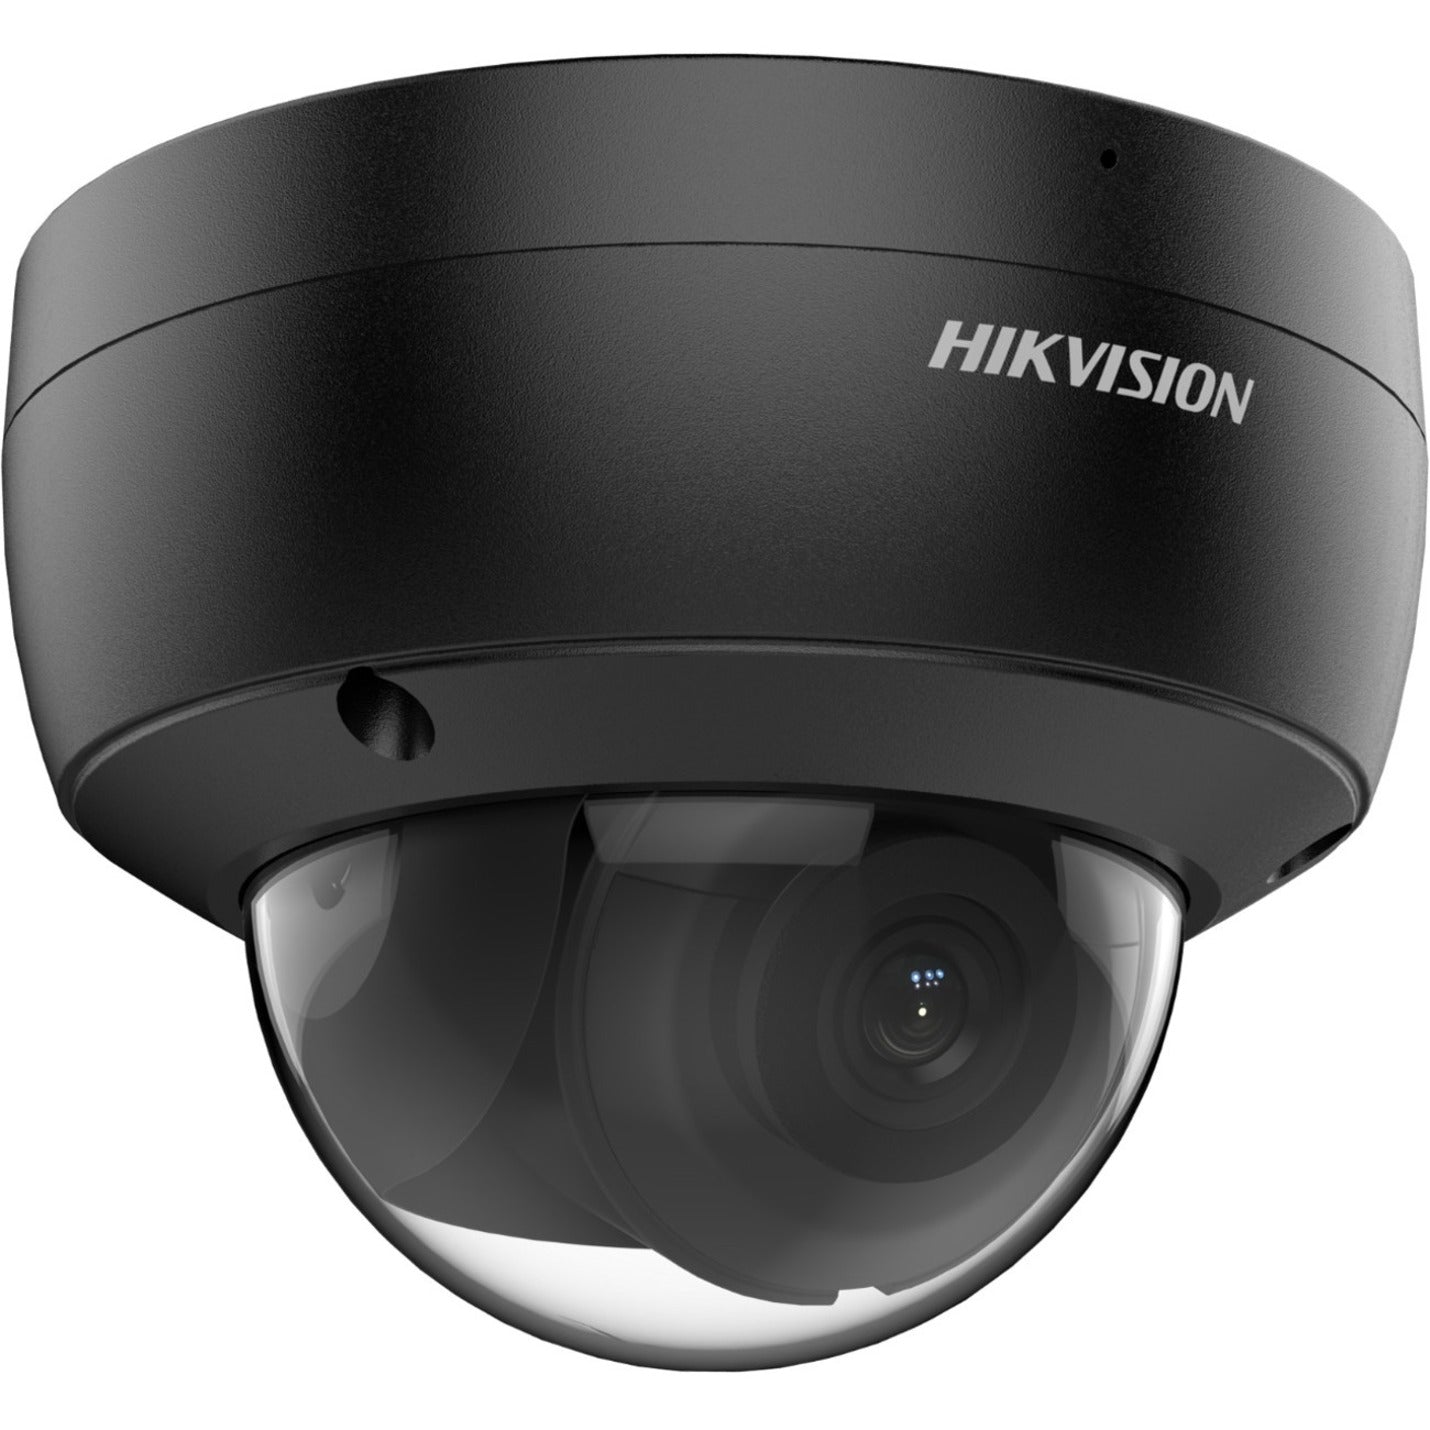 Hikvision DS-2CD2123G2-IU 2.8MM EasyIP 2MP EXIR Fixed Dome Network Camera, Full HD, Night Vision, Built-in Microphone, IP67 Waterproof